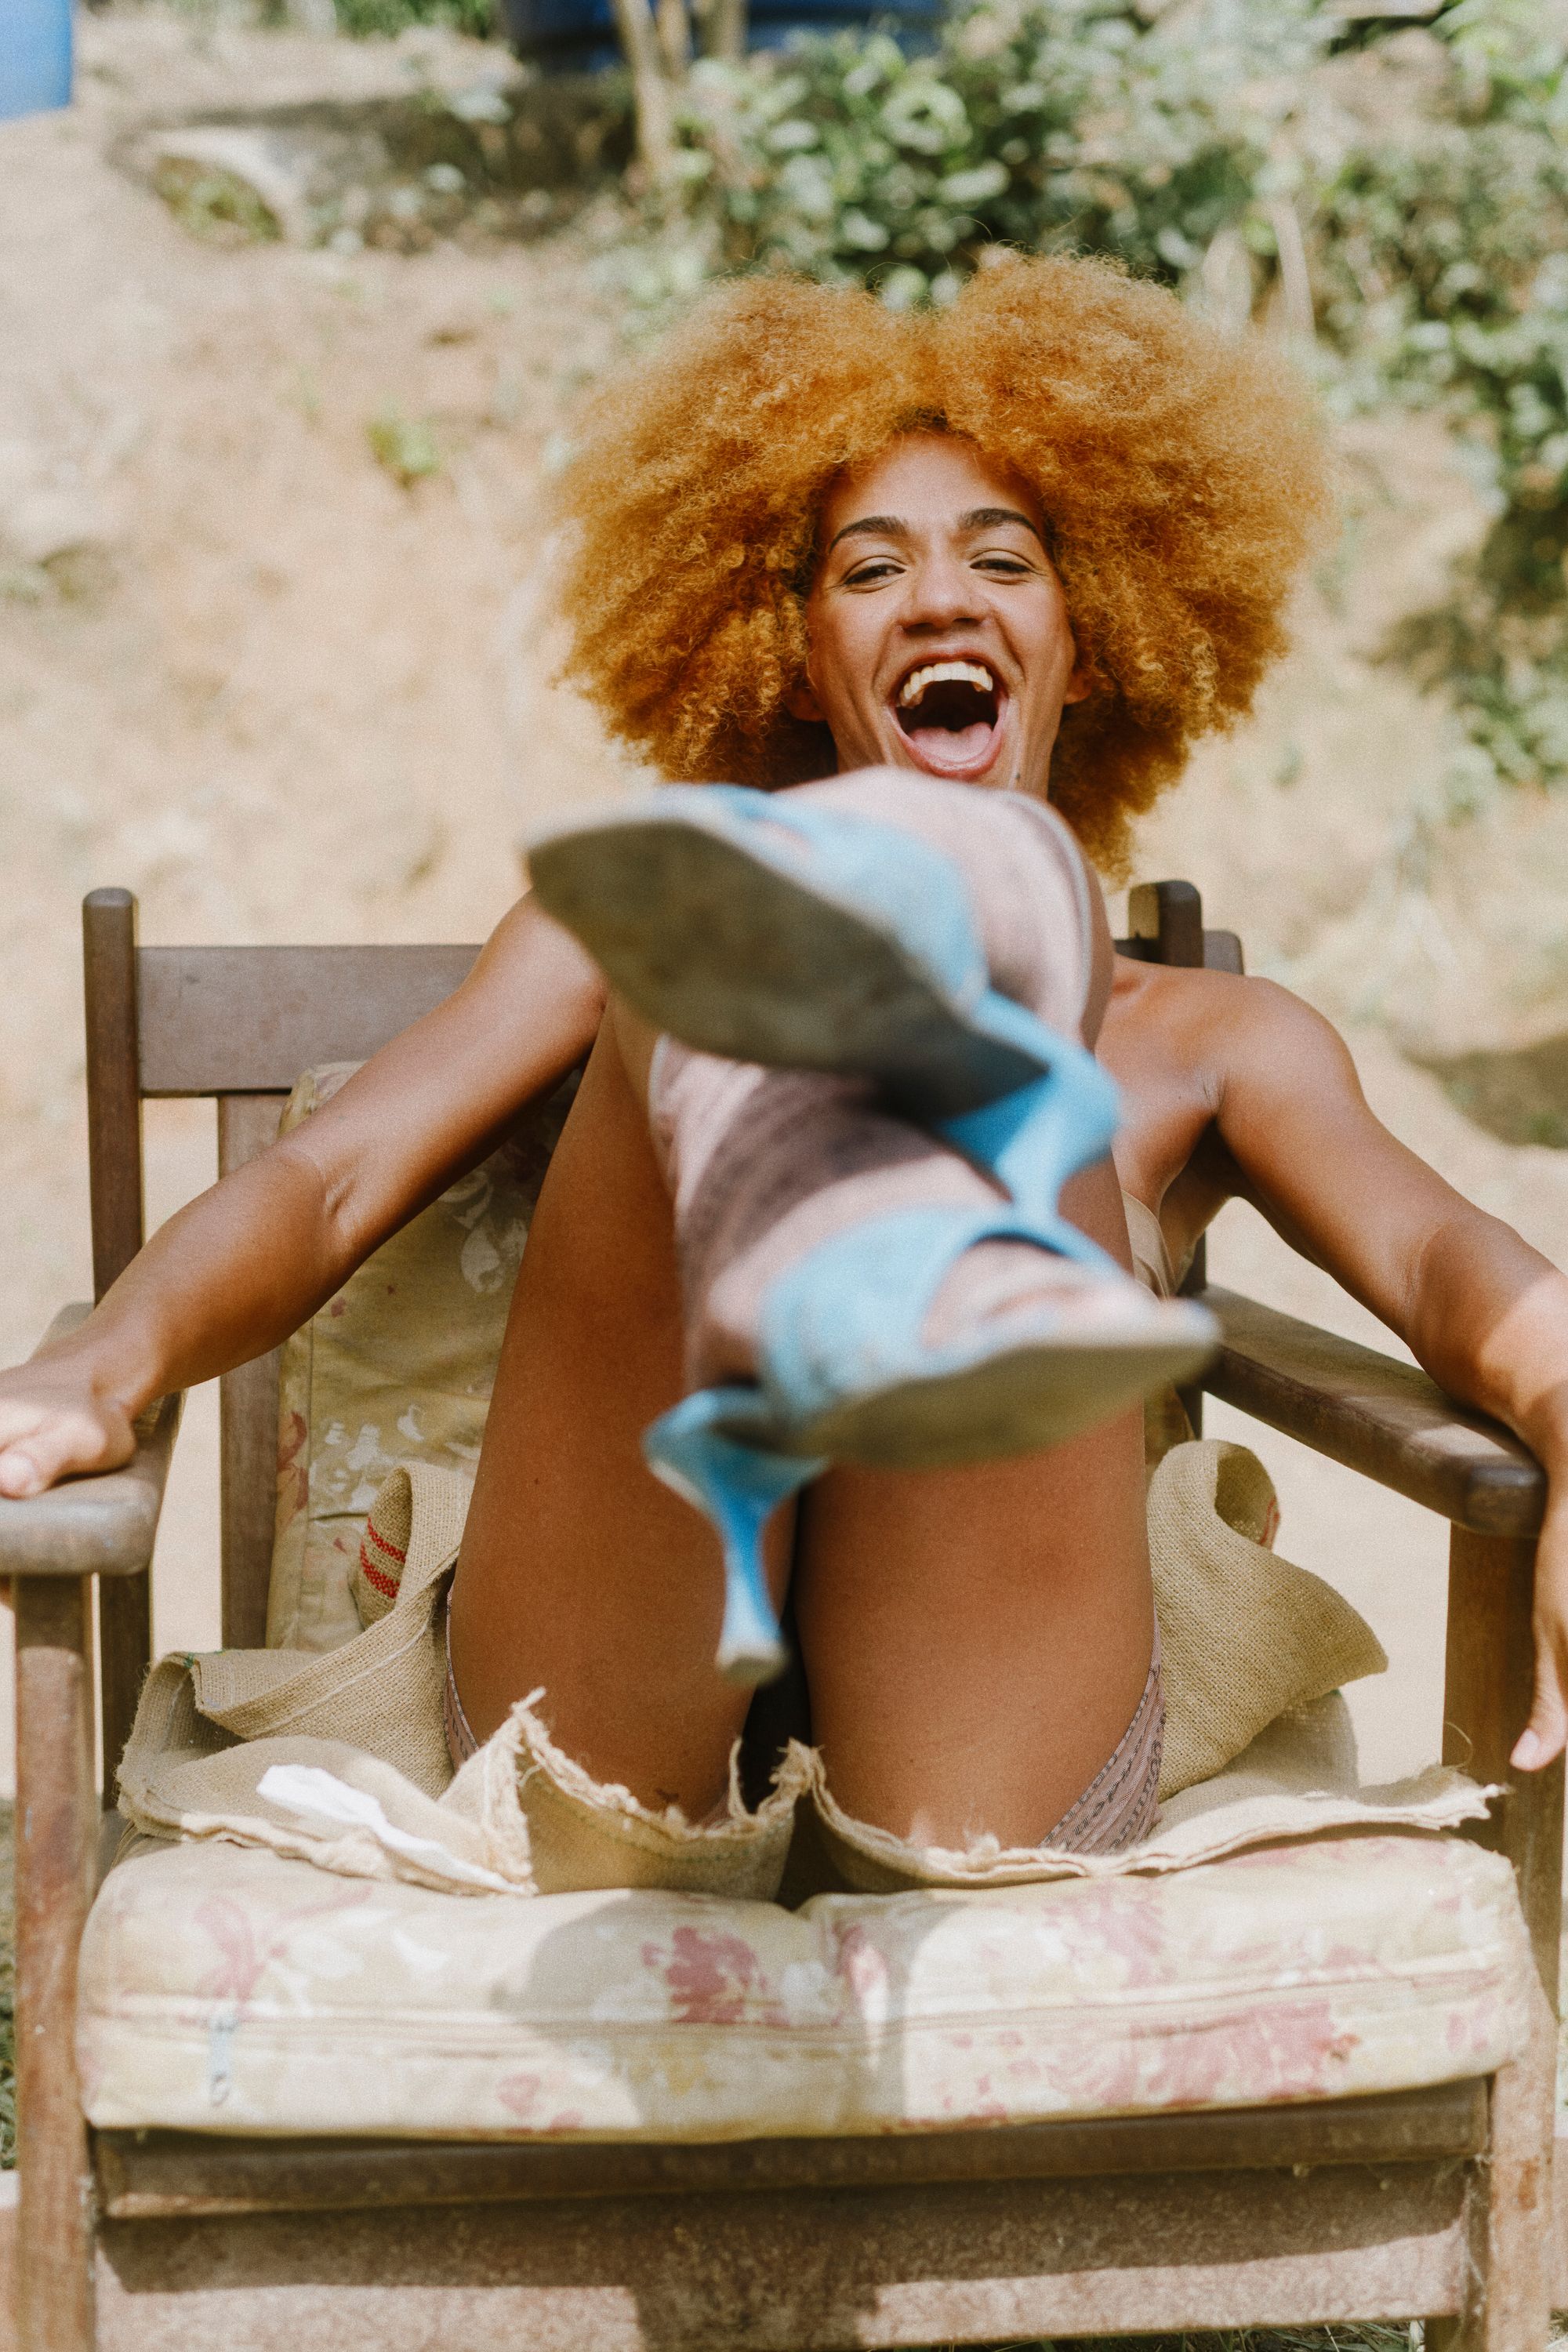 Brasilian travesti with natural red hair, wearing a blue heels, is kicking her feet towards the camera and laughing